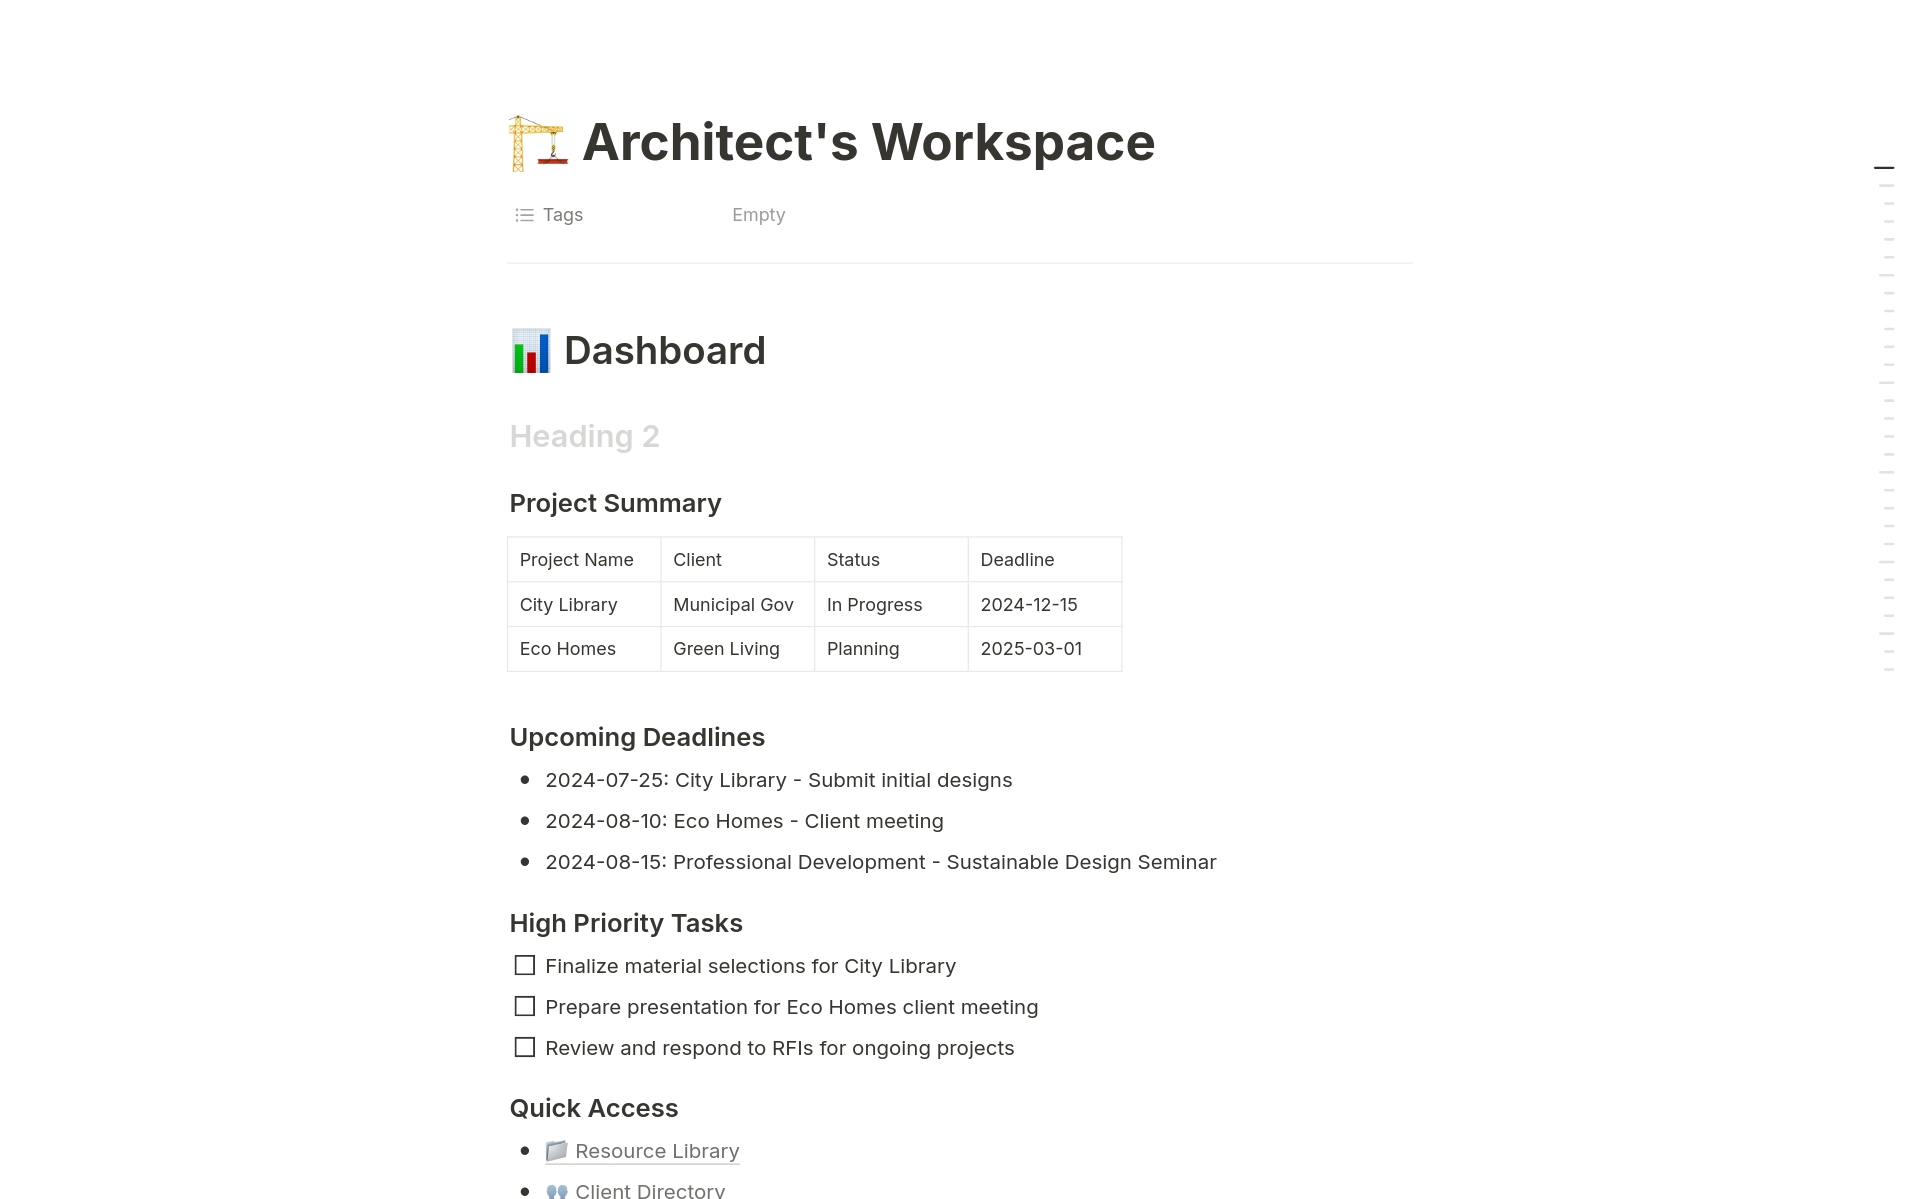 🏗️ Comprehensive Architect's Workspace Template
Elevate your architectural practice with this all-in-one Notion template. Designed by architects for architects, this workspace streamlines project management, enhances design processes, and boosts team collaboration.